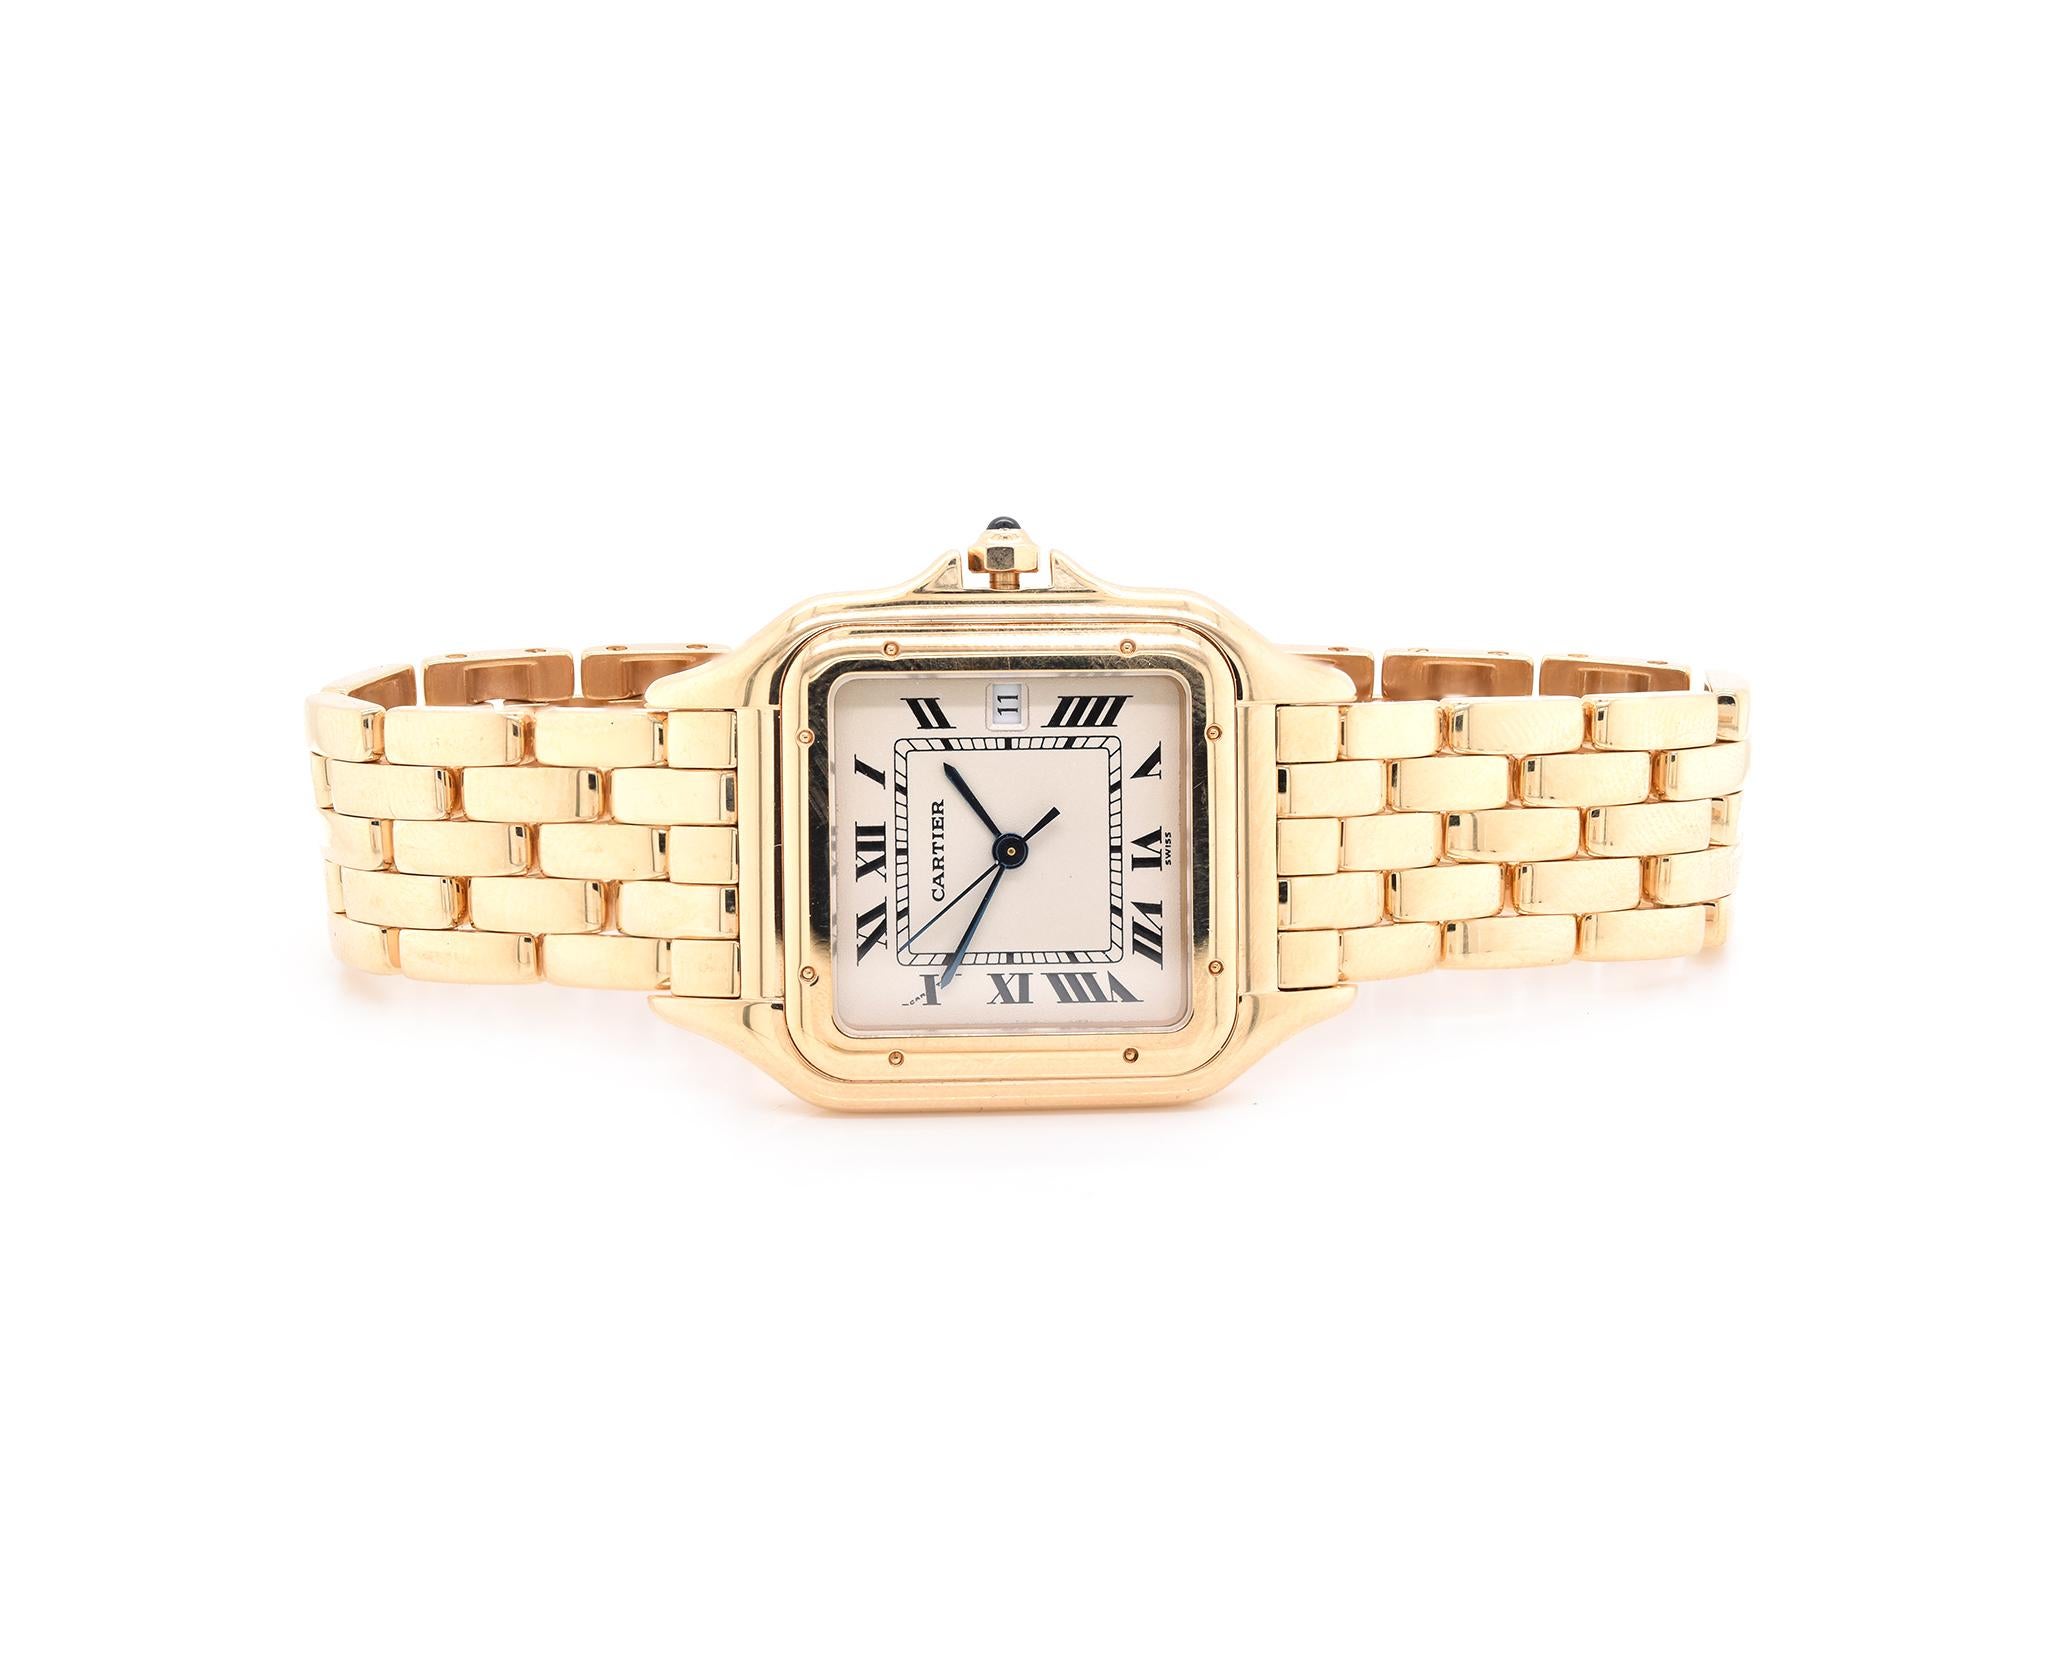 Movement: quartz
Function: hours, minutes, date
Case: 27 X 37mm 18K yellow gold case, push-pull crown, sapphire crystal
Dial: cream dial, black transferred Roman numerals, and steel sword-shaped hands
Band: 18K yellow gold panther link
Serial #: